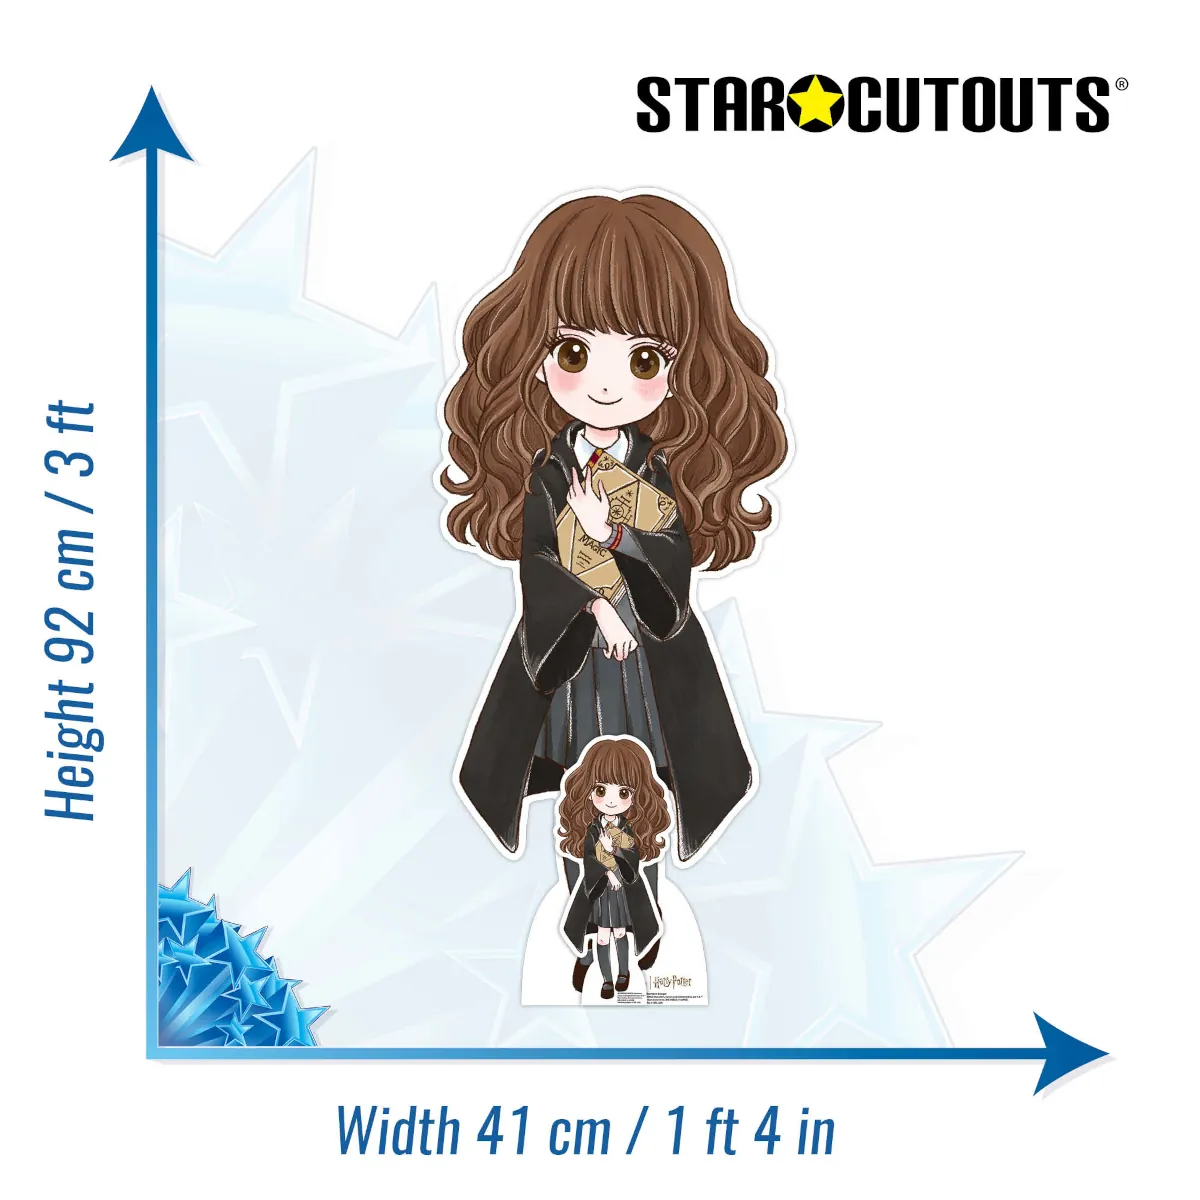 SC4454 Cute Hermione Granger 'Animated' (Harry Potter) Official Mini + Tabletop Cardboard Cutout Standee Size